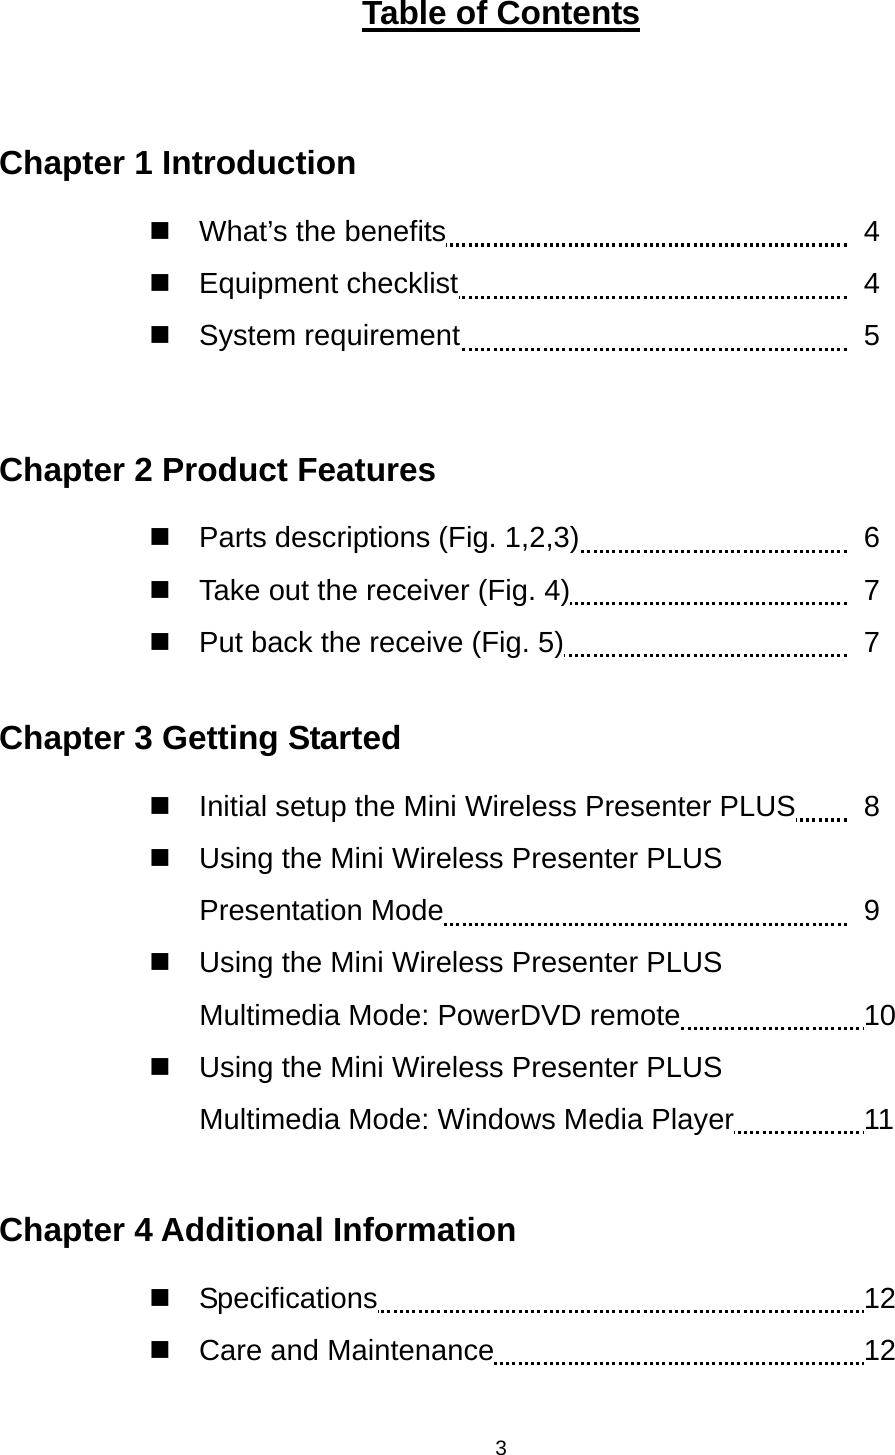    3Table of Contents  Chapter 1 Introduction  What’s the benefits          4  Equipment checklist         4  System requirement         5  Chapter 2 Product Features  Parts descriptions (Fig. 1,2,3)        6   Take out the receiver (Fig. 4)               7   Put back the receive (Fig. 5)               7  Chapter 3 Getting Started   Initial setup the Mini Wireless Presenter PLUS    8   Using the Mini Wireless Presenter PLUS Presentation Mode              9   Using the Mini Wireless Presenter PLUS Multimedia Mode: PowerDVD remote     10   Using the Mini Wireless Presenter PLUS Multimedia Mode: Windows Media Player        11  Chapter 4 Additional Information  Specifications            12  Care and Maintenance         12  